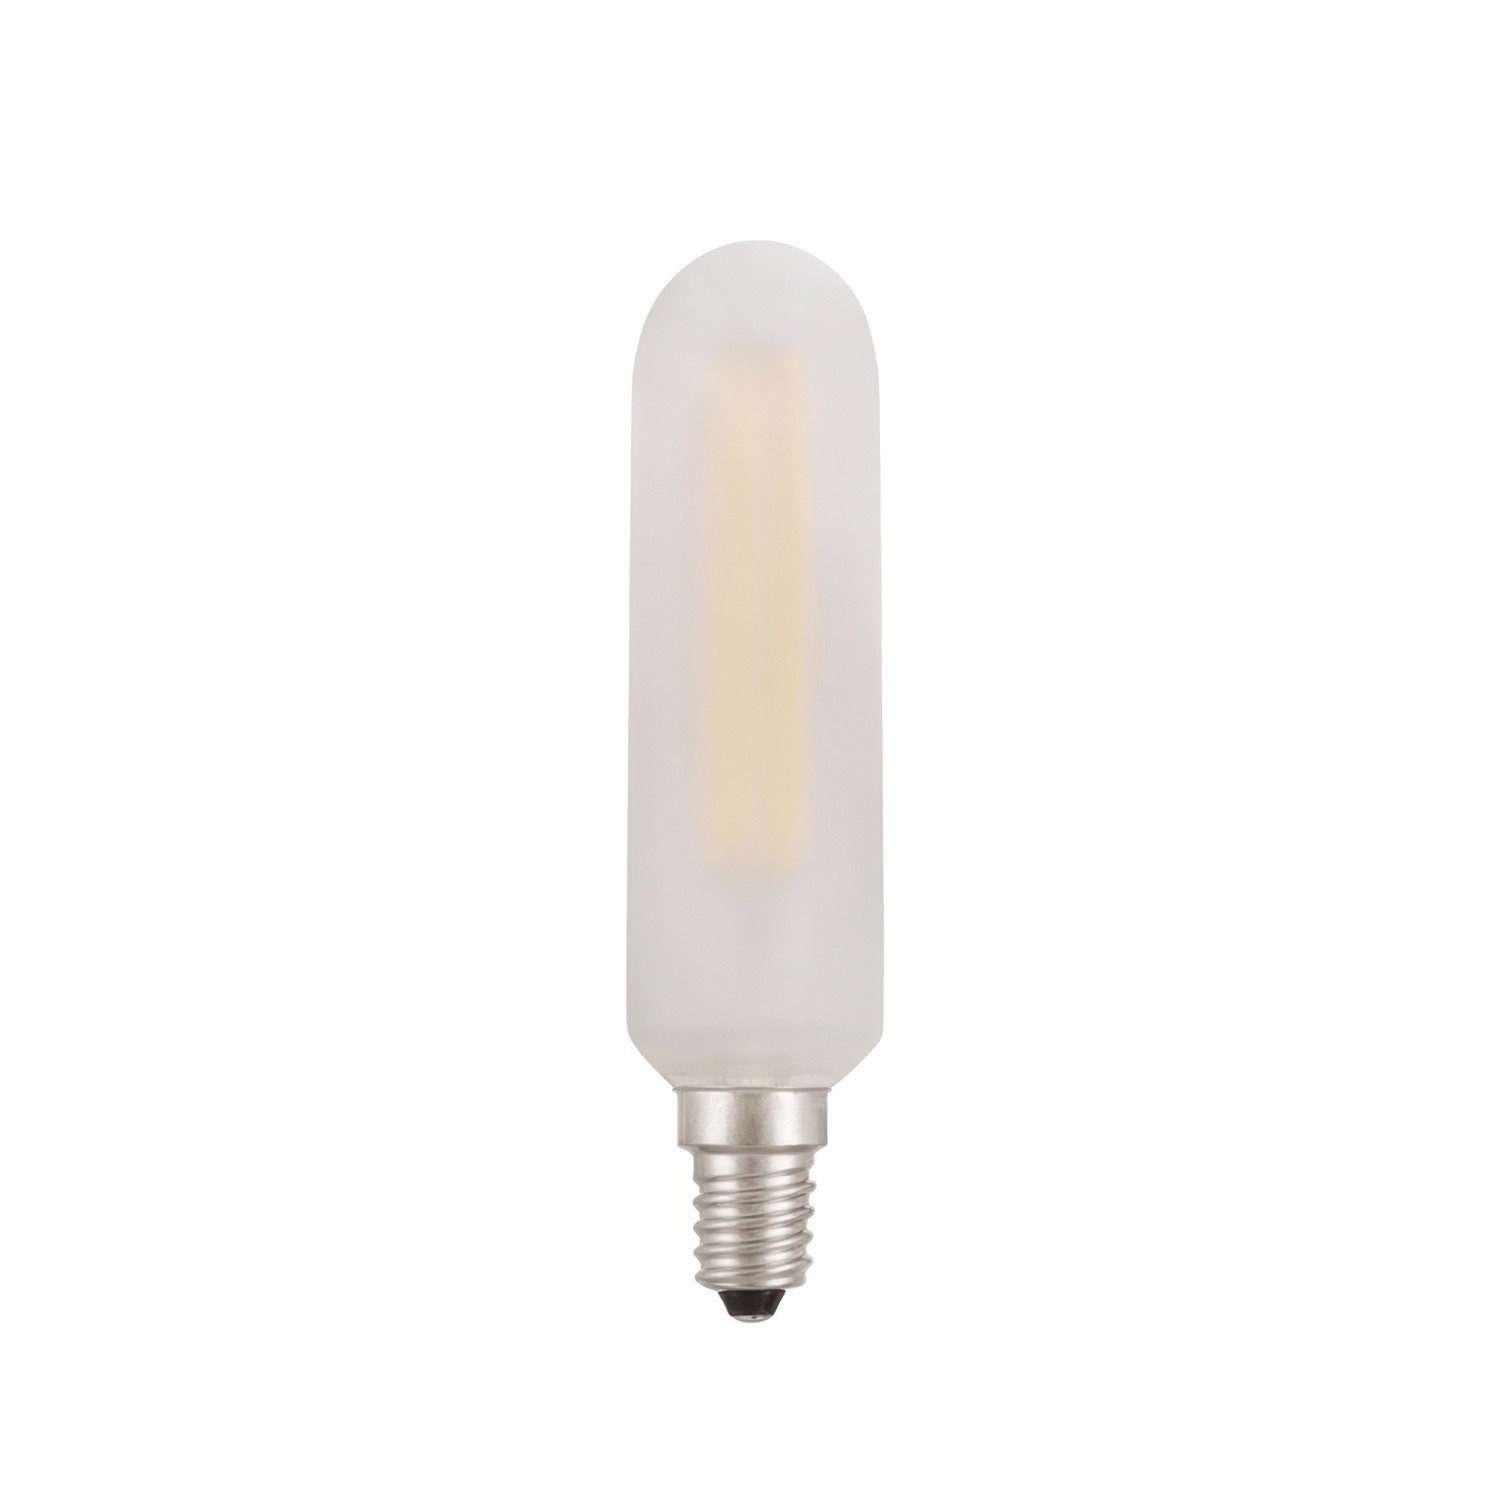 https://www.creative-cables.be/89187-big_default/ampoule-led-tubulaire-blanc-satine-e14-4w-dimmable-2700k.jpg